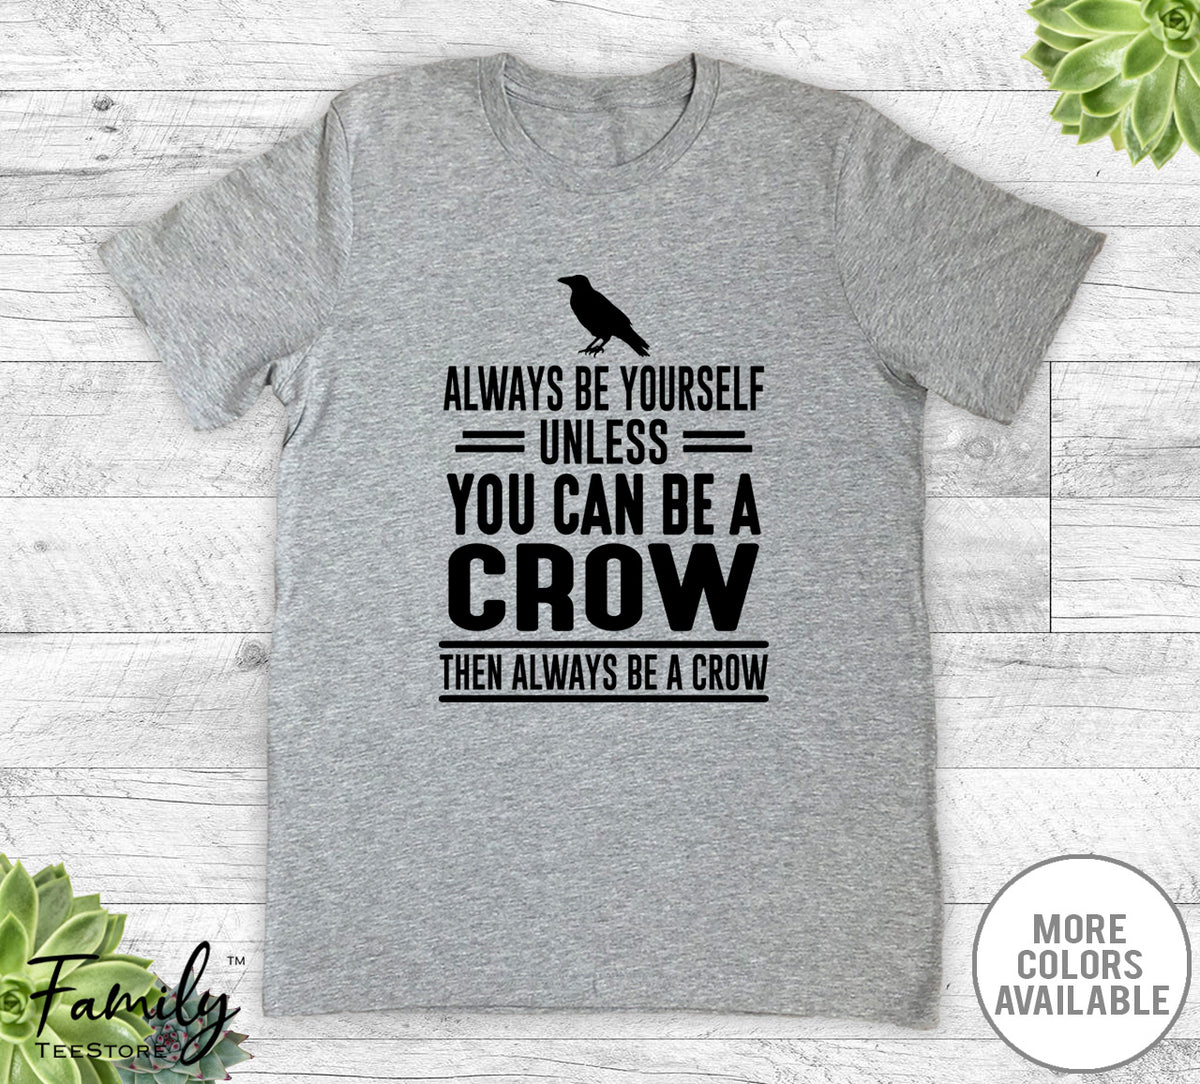 Always Be Yourself Unless You Can Be A Crow - Unisex T-shirt - Crow Shirt - Crow Gift - familyteeprints